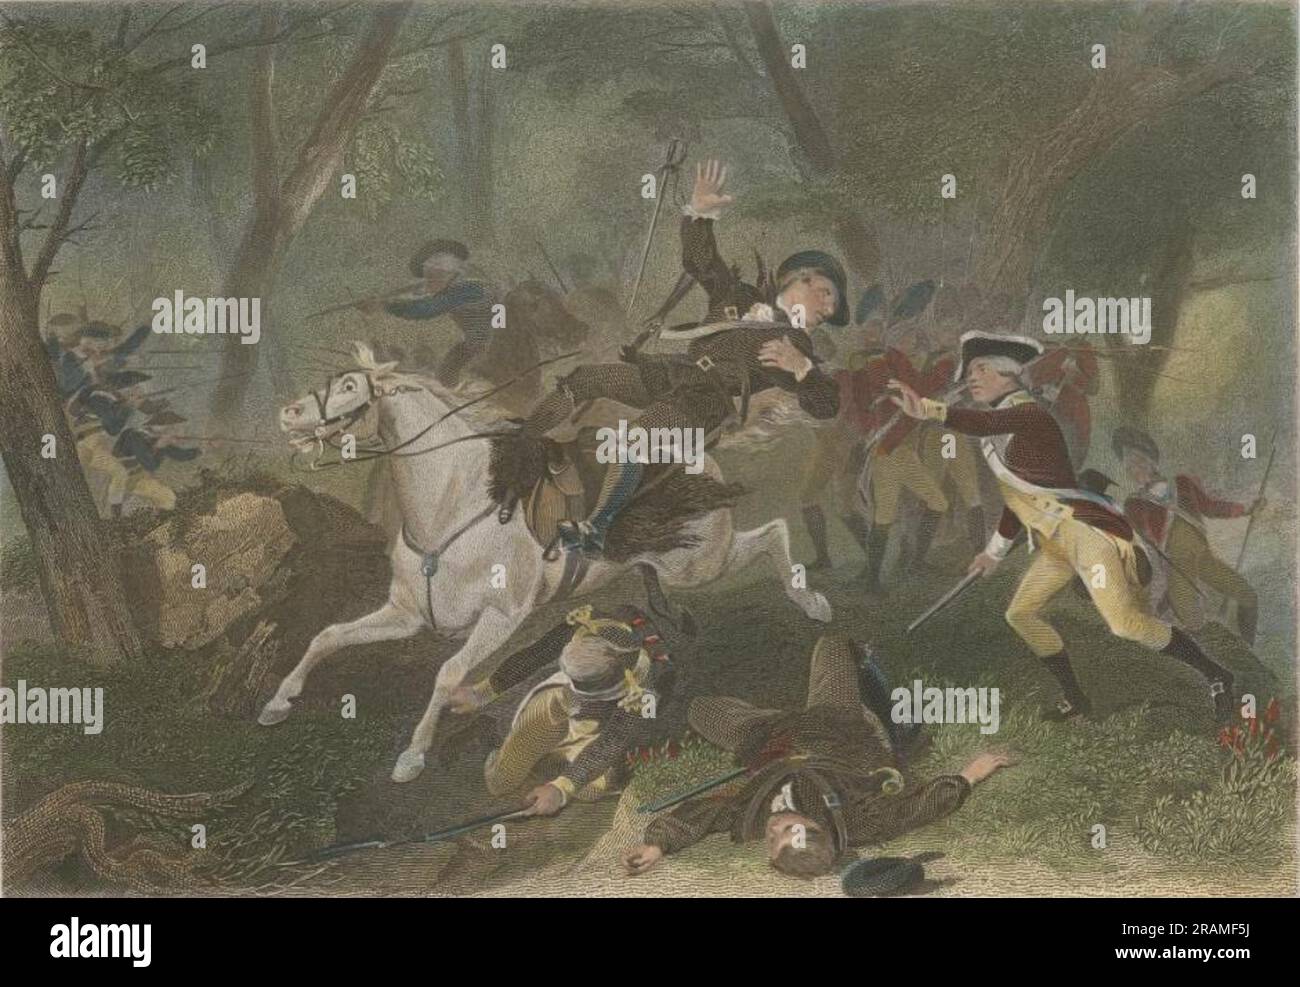 The Death of British Major Patrick Ferguson at the Battle of Kings Mountain During the American Revolutionary War, October 7, 1780 1863 by Alonzo Chappel Stock Photo